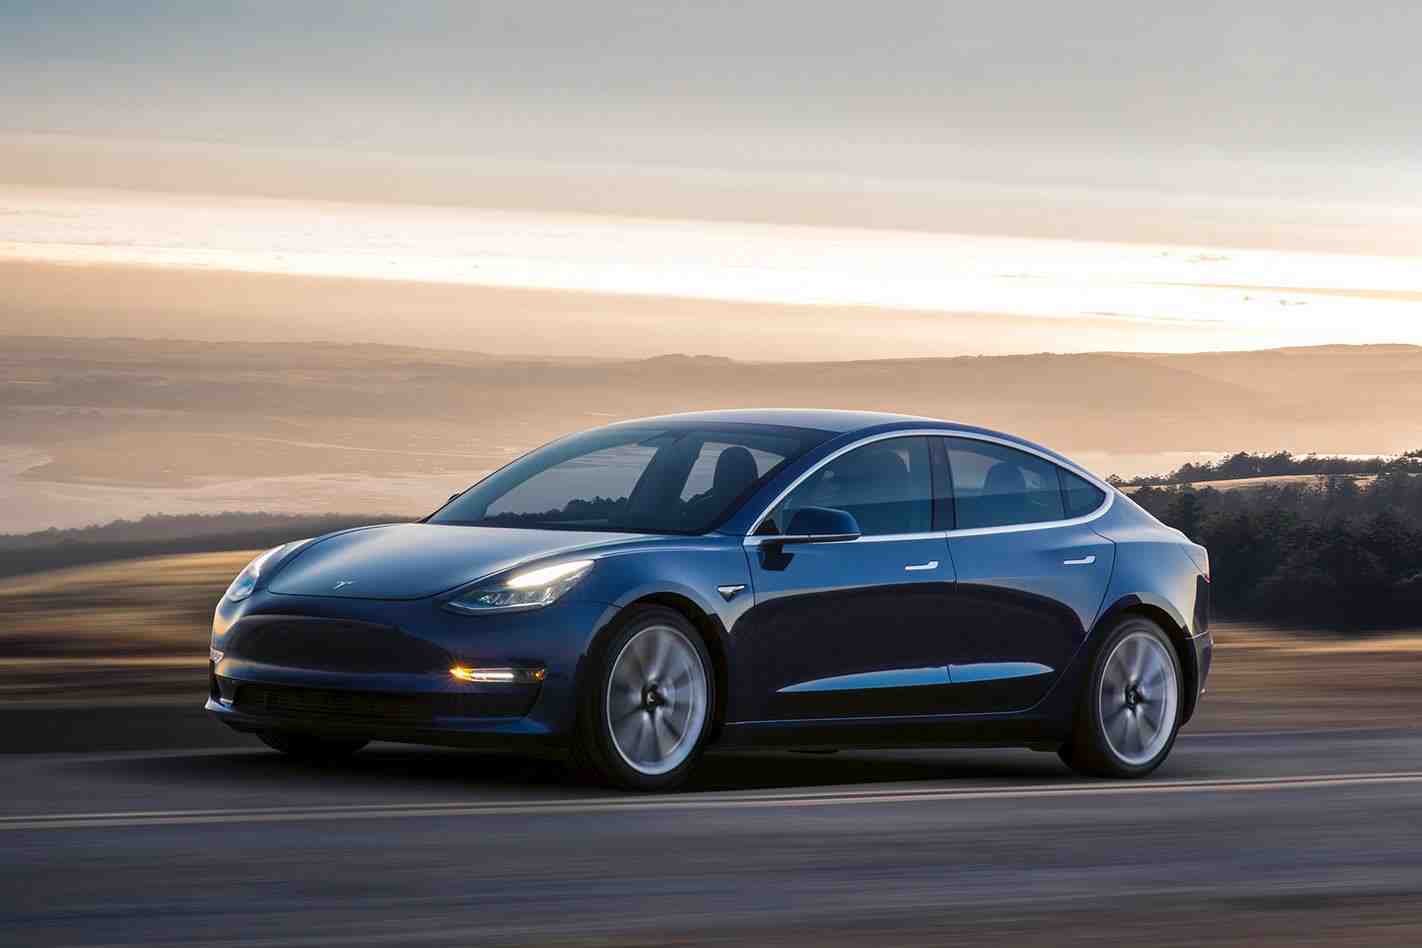 How much does a Tesla cost to run?